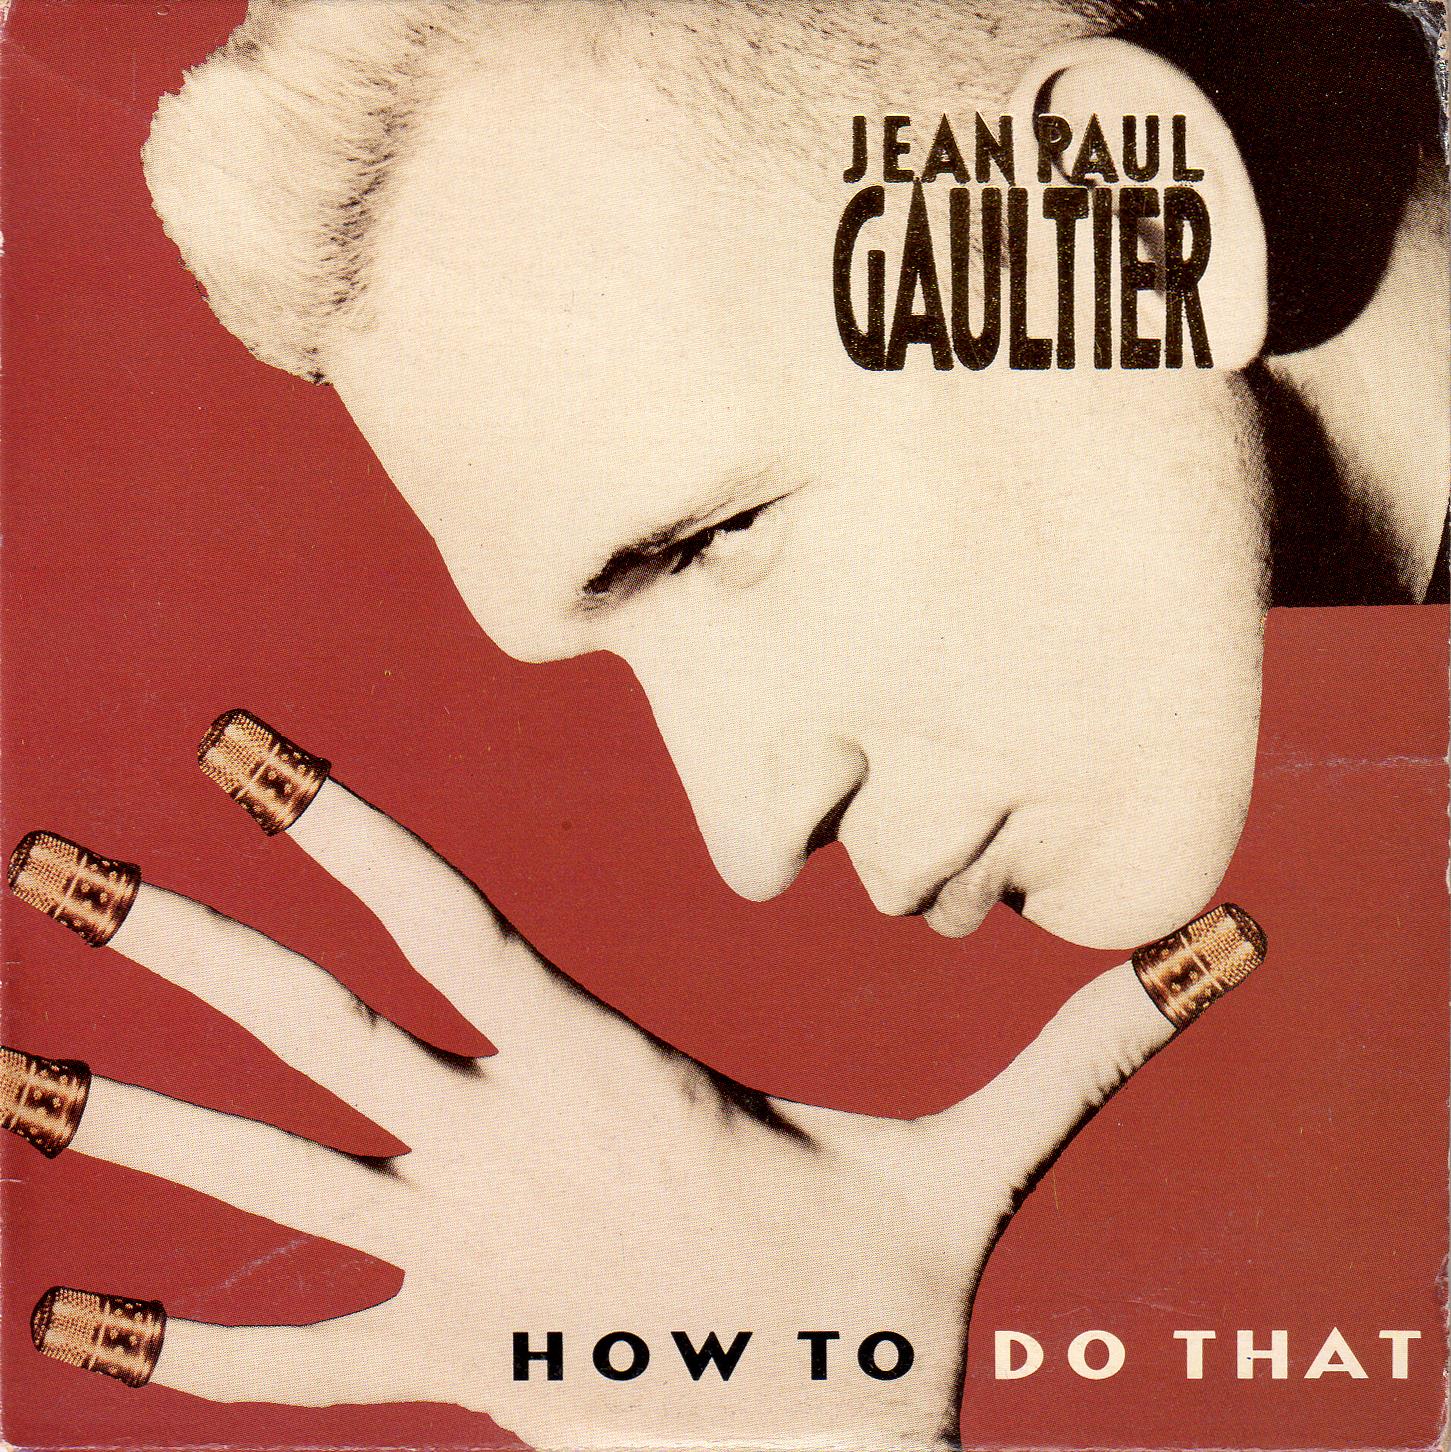 Jean Paul Gaultier - How To Do That (Cds)[1989]